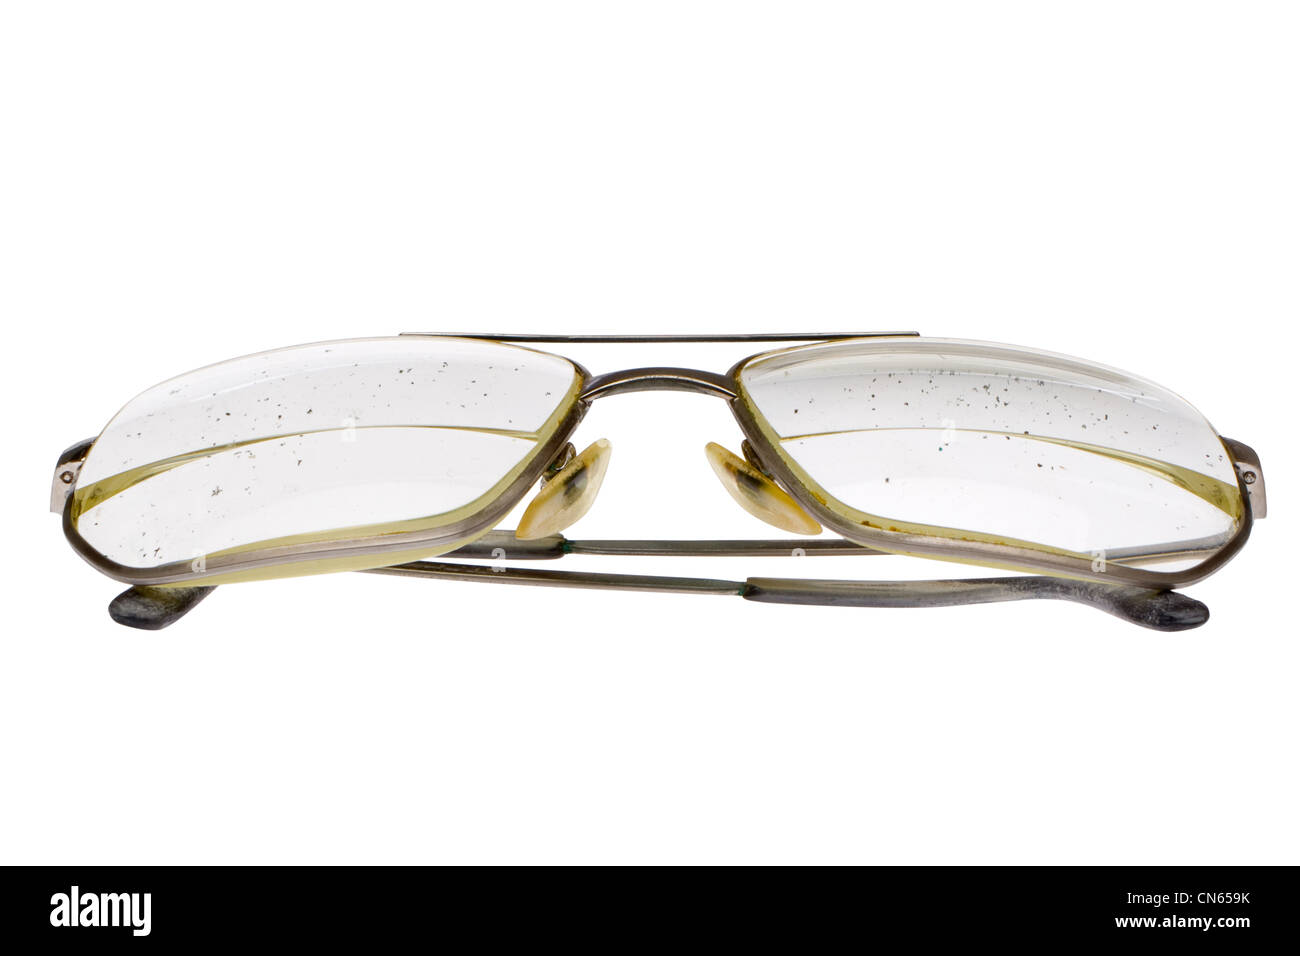 Folded old, dirty eyeglasses with thick bifocal lens in gold metal frame. Glasses of elderly man. Speckled dirt on lens. Stock Photo